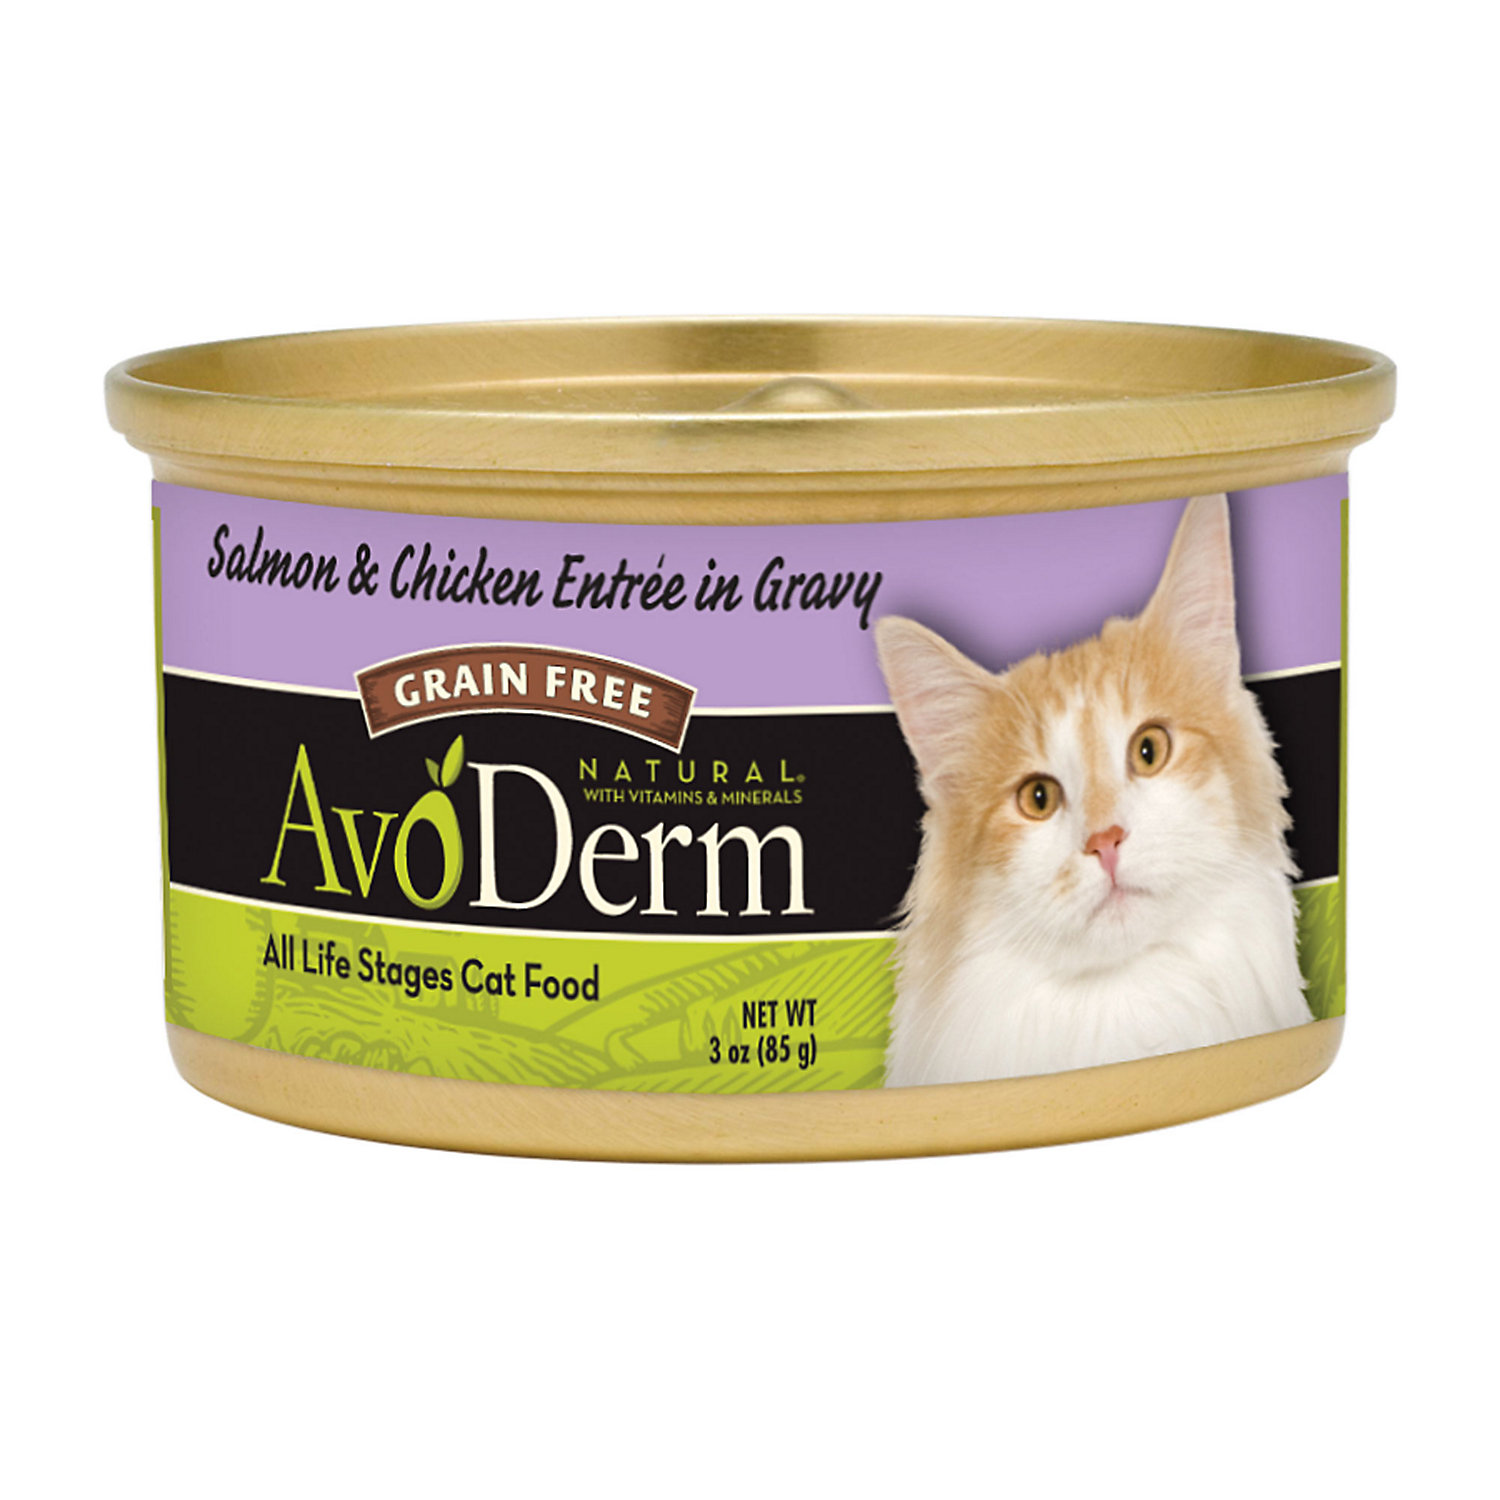 AvoDerm Salmon & Chicken Entree in Gravy Canned Cat Food, 3 